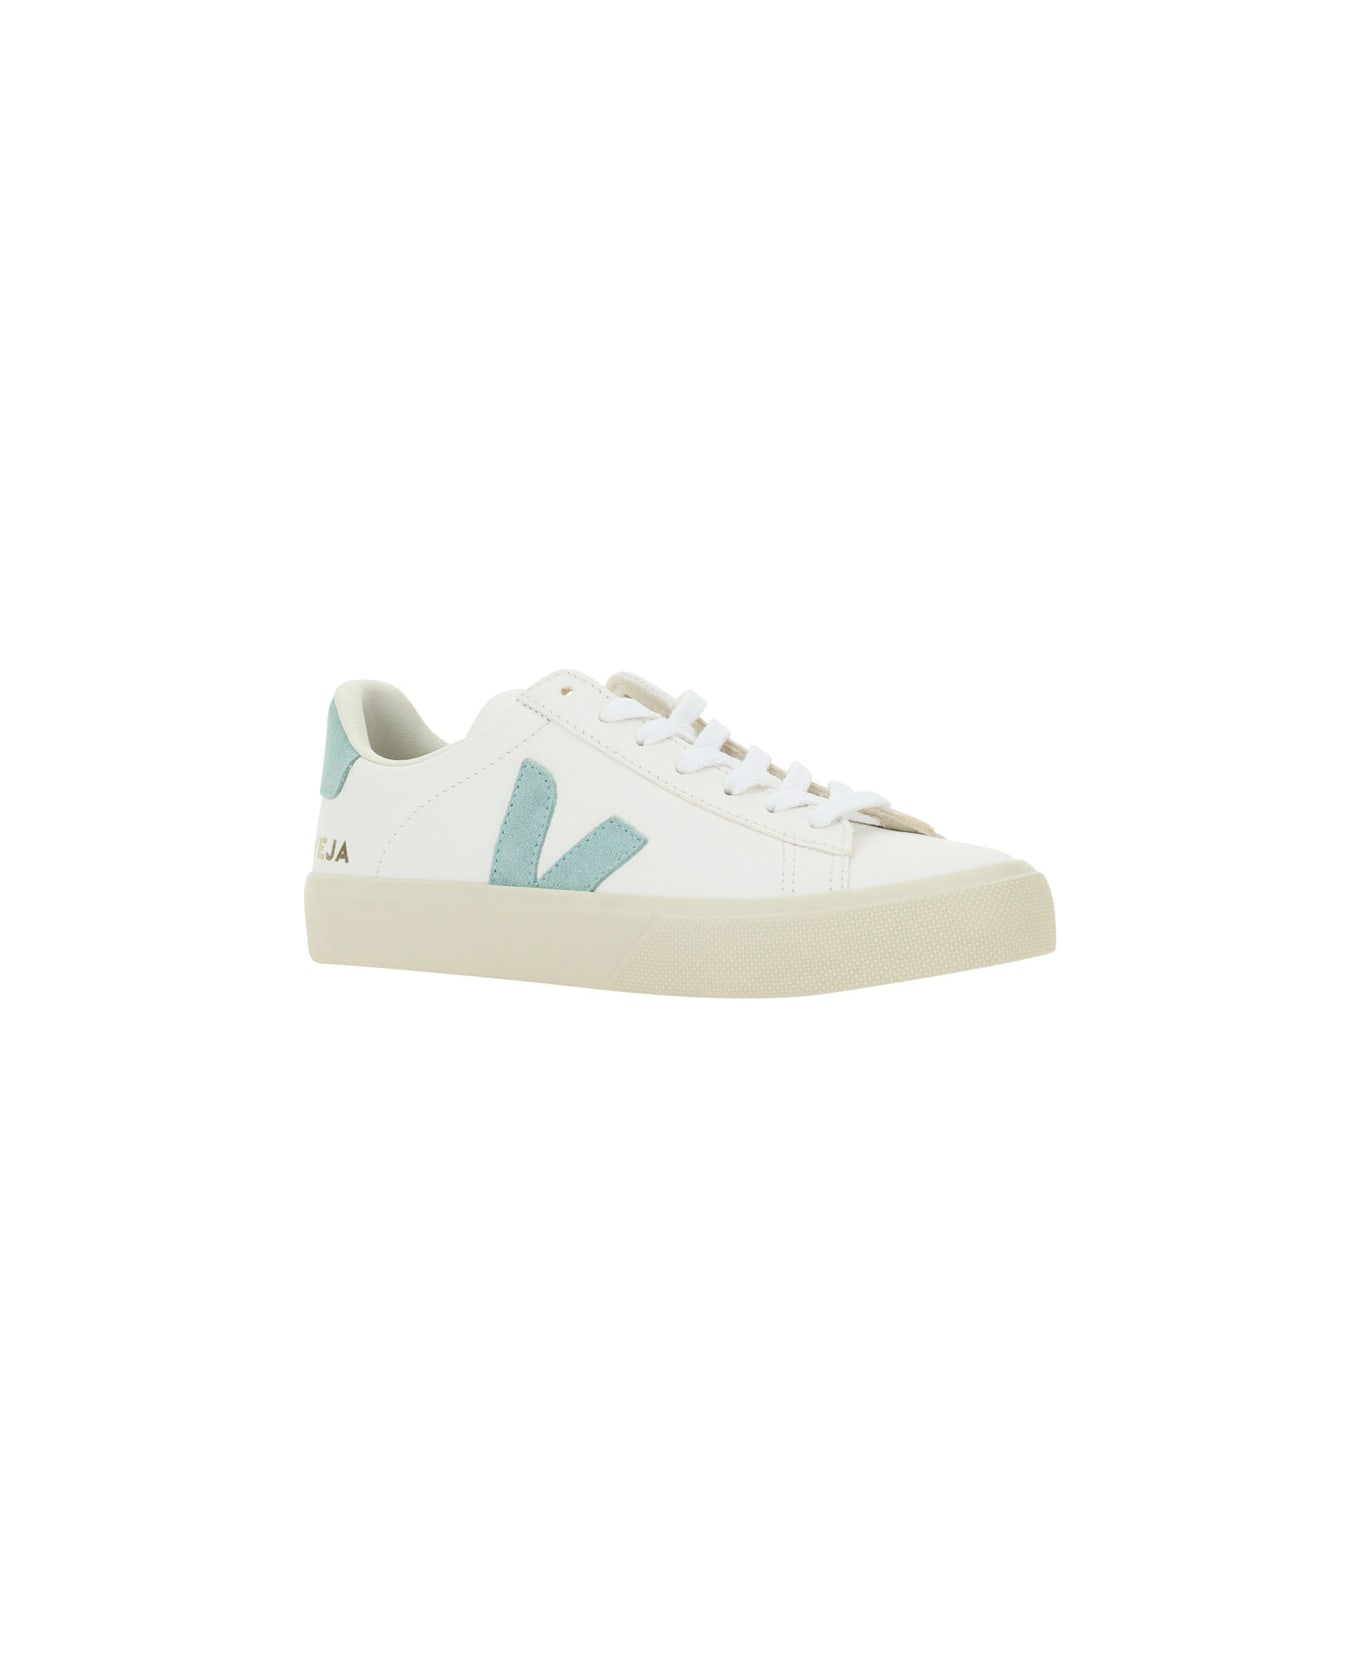 Veja Sneakers - Extra White/matcha